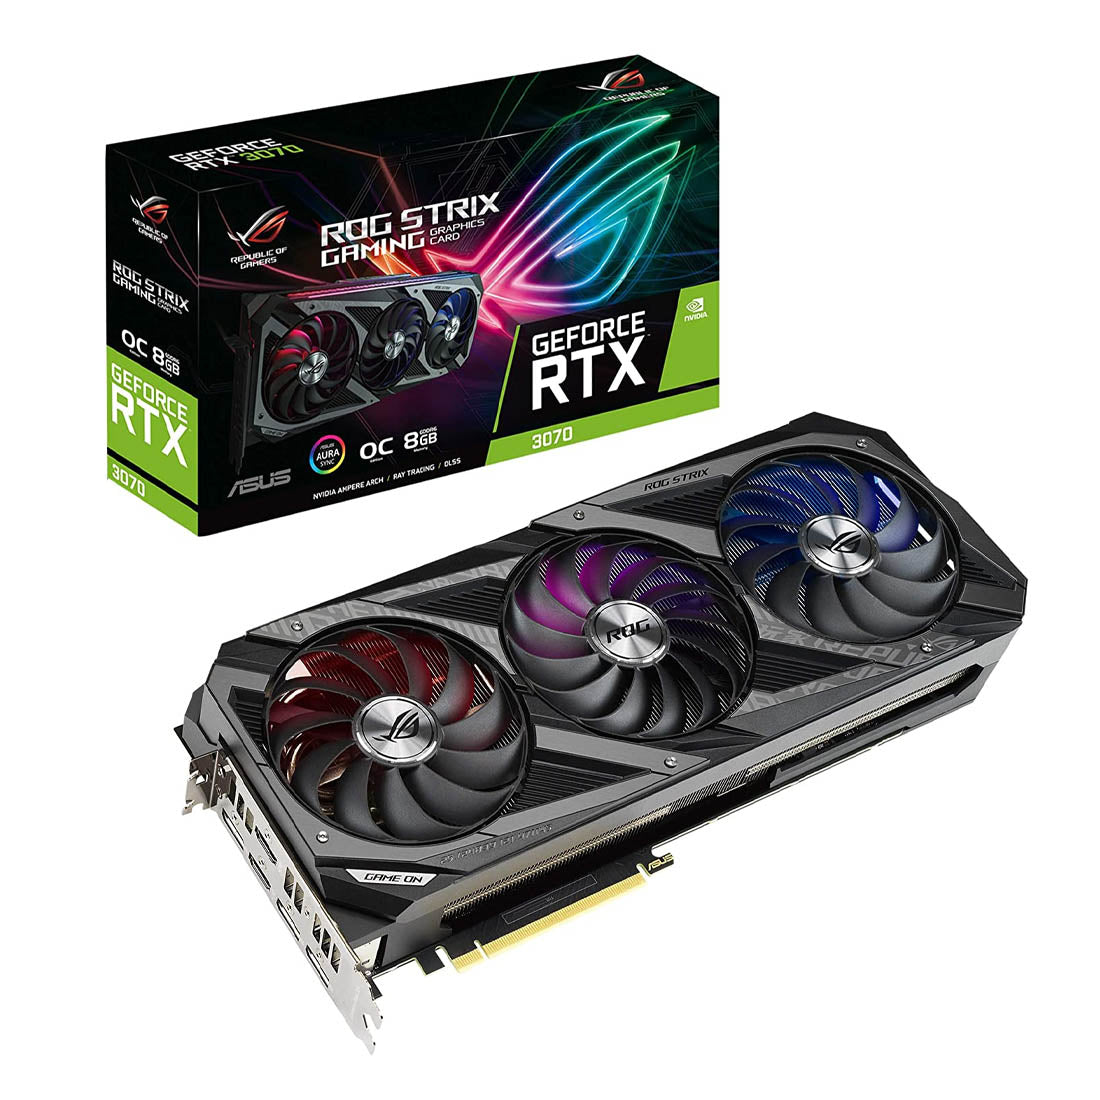 ASUS ROG STRIX NVIDIA GeForce RTX 3070 OC Edition non LHR Graphics Card GDDR6 8GB 256-Bit with DLSS AI Rendering